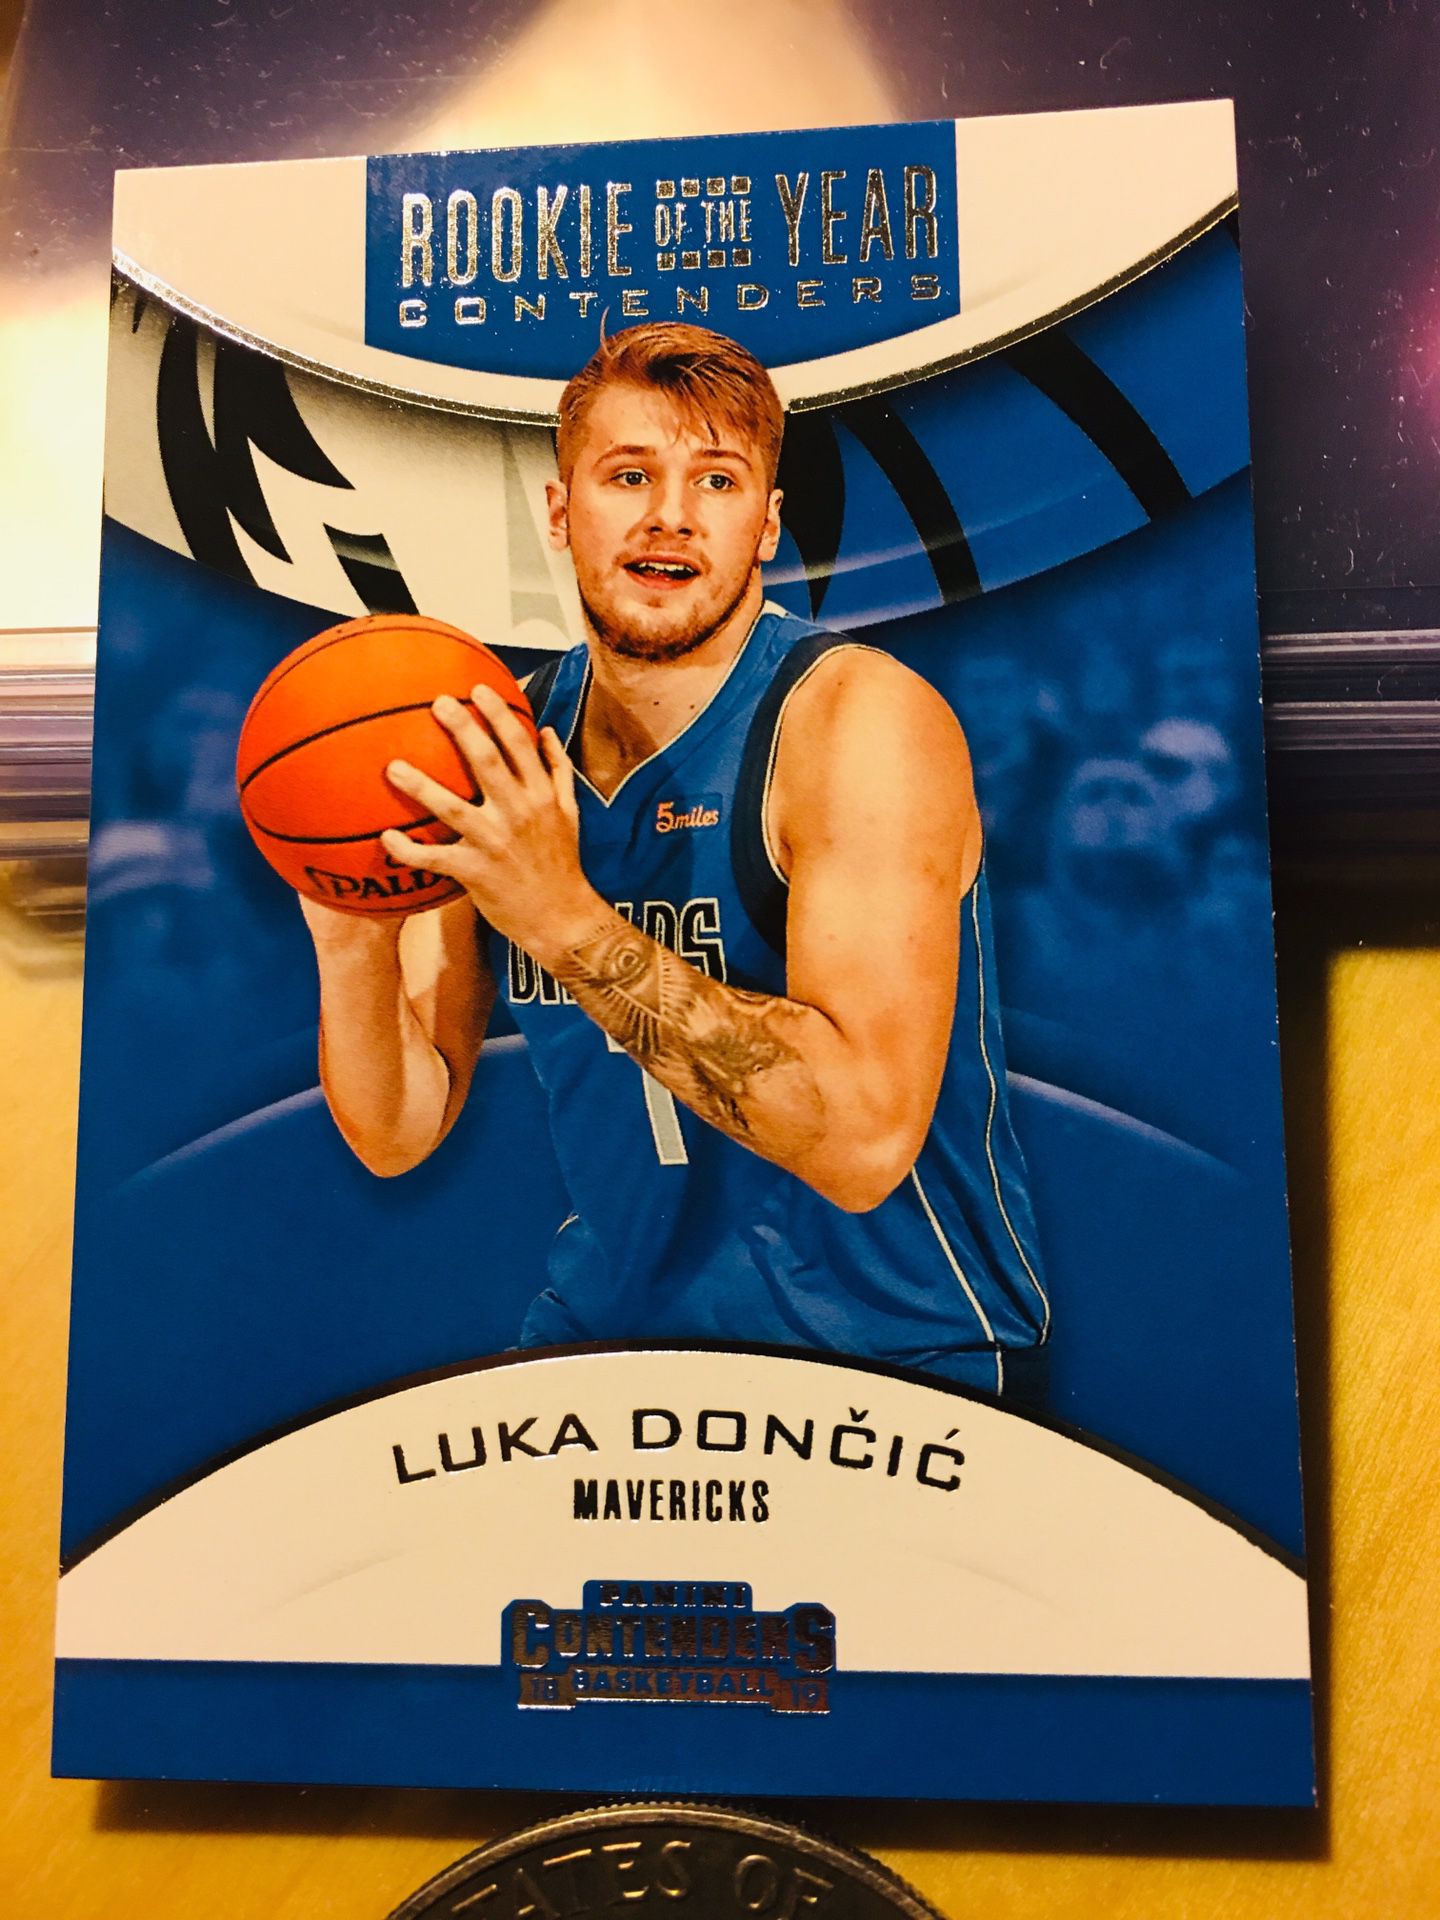 💥💥💥💥💥 2018 Panini Contenders Luka Doncic Rookie Of The Year Contenders Card #4 FIRE! 💥💥💥💥💥